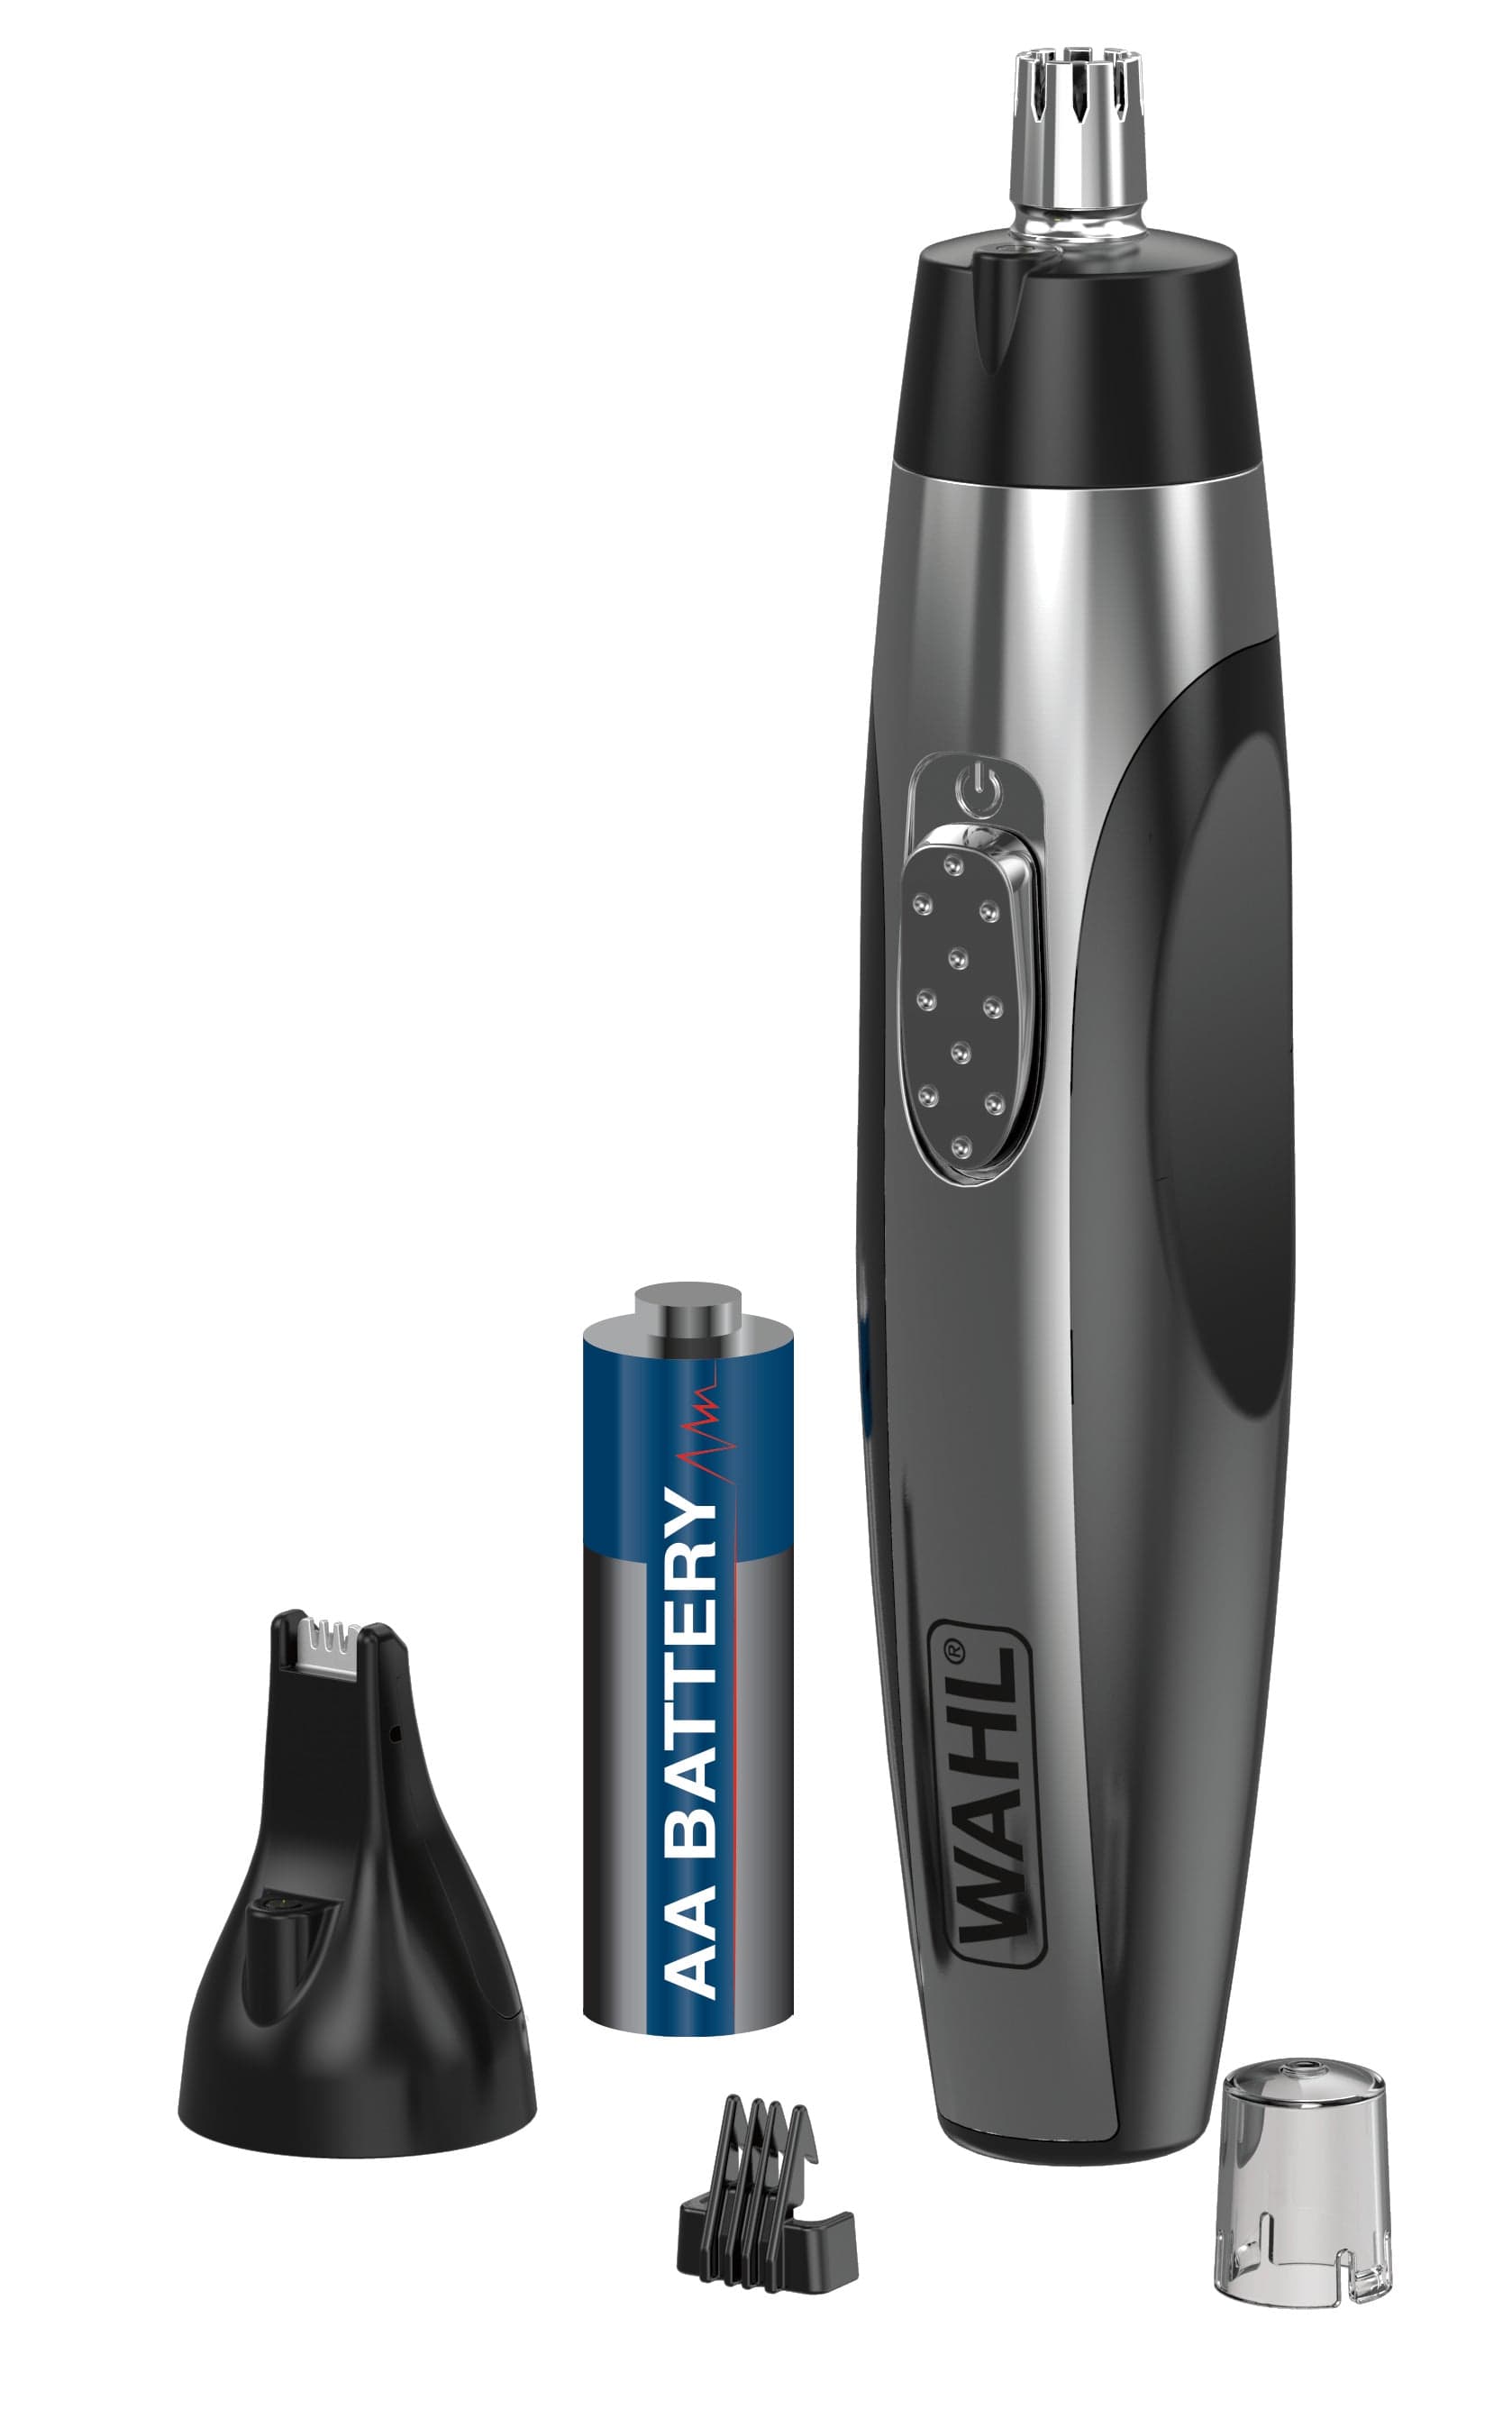 WAHL EAR NOSE & BROW BATTERY OPERATED 2-IN-1 DELUXE LIGHTEDTRIMMER - 5546-216